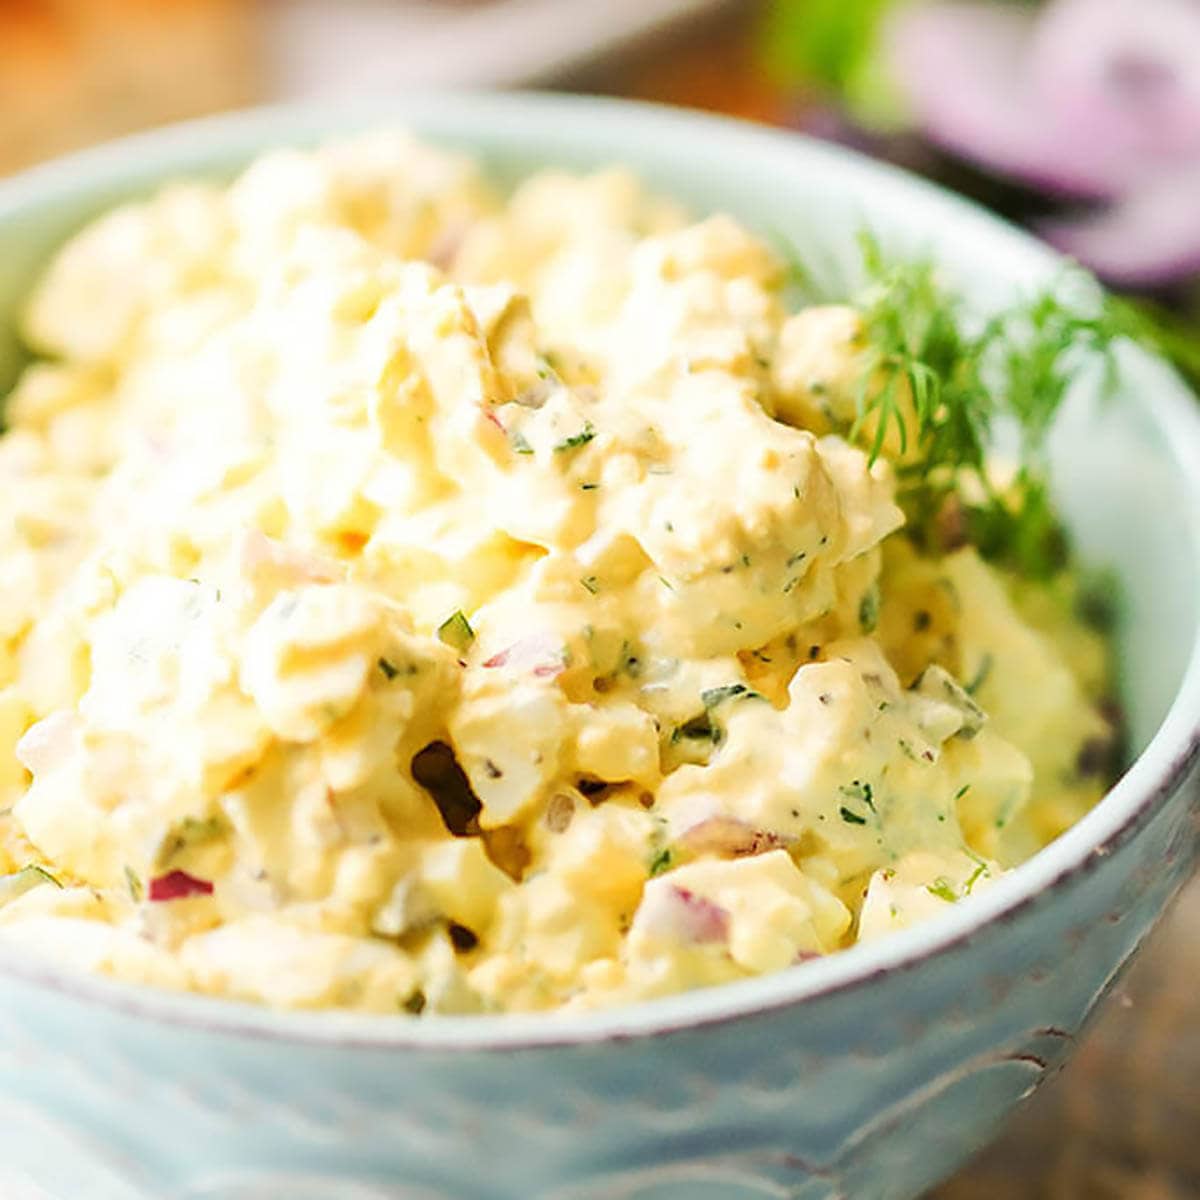 Egg Salad Spread in bowl garnished with dill.